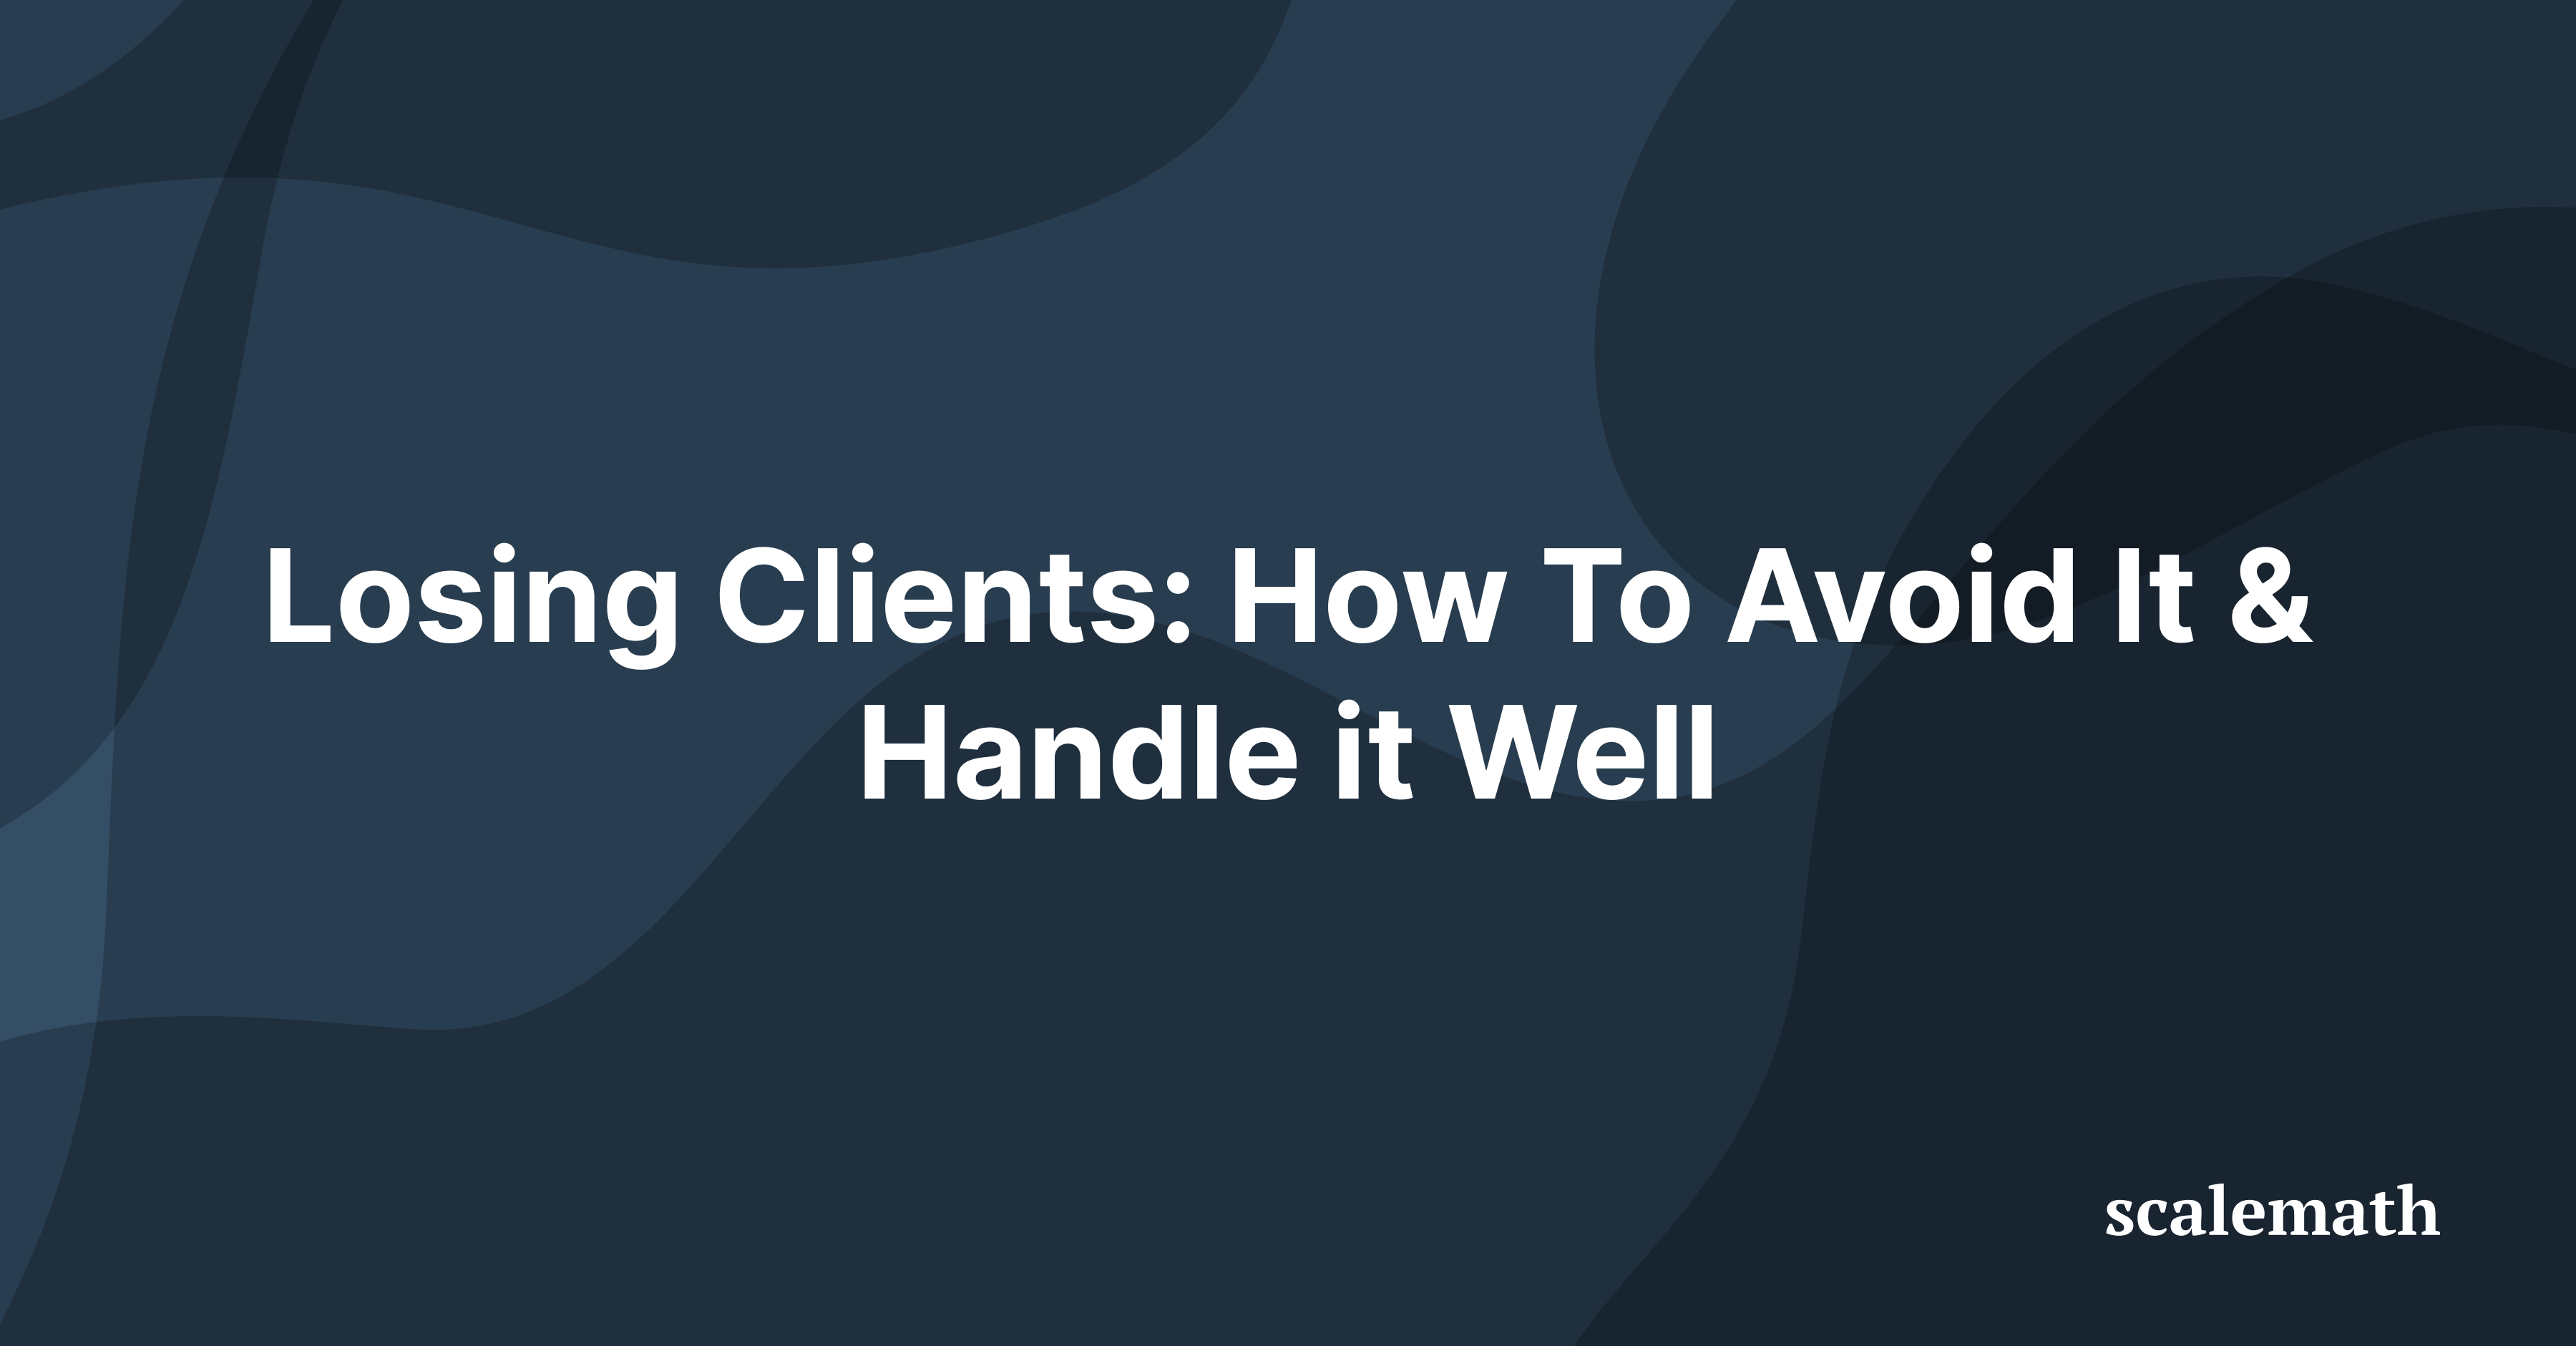 Losing Clients: How To Avoid It & Handle it Well